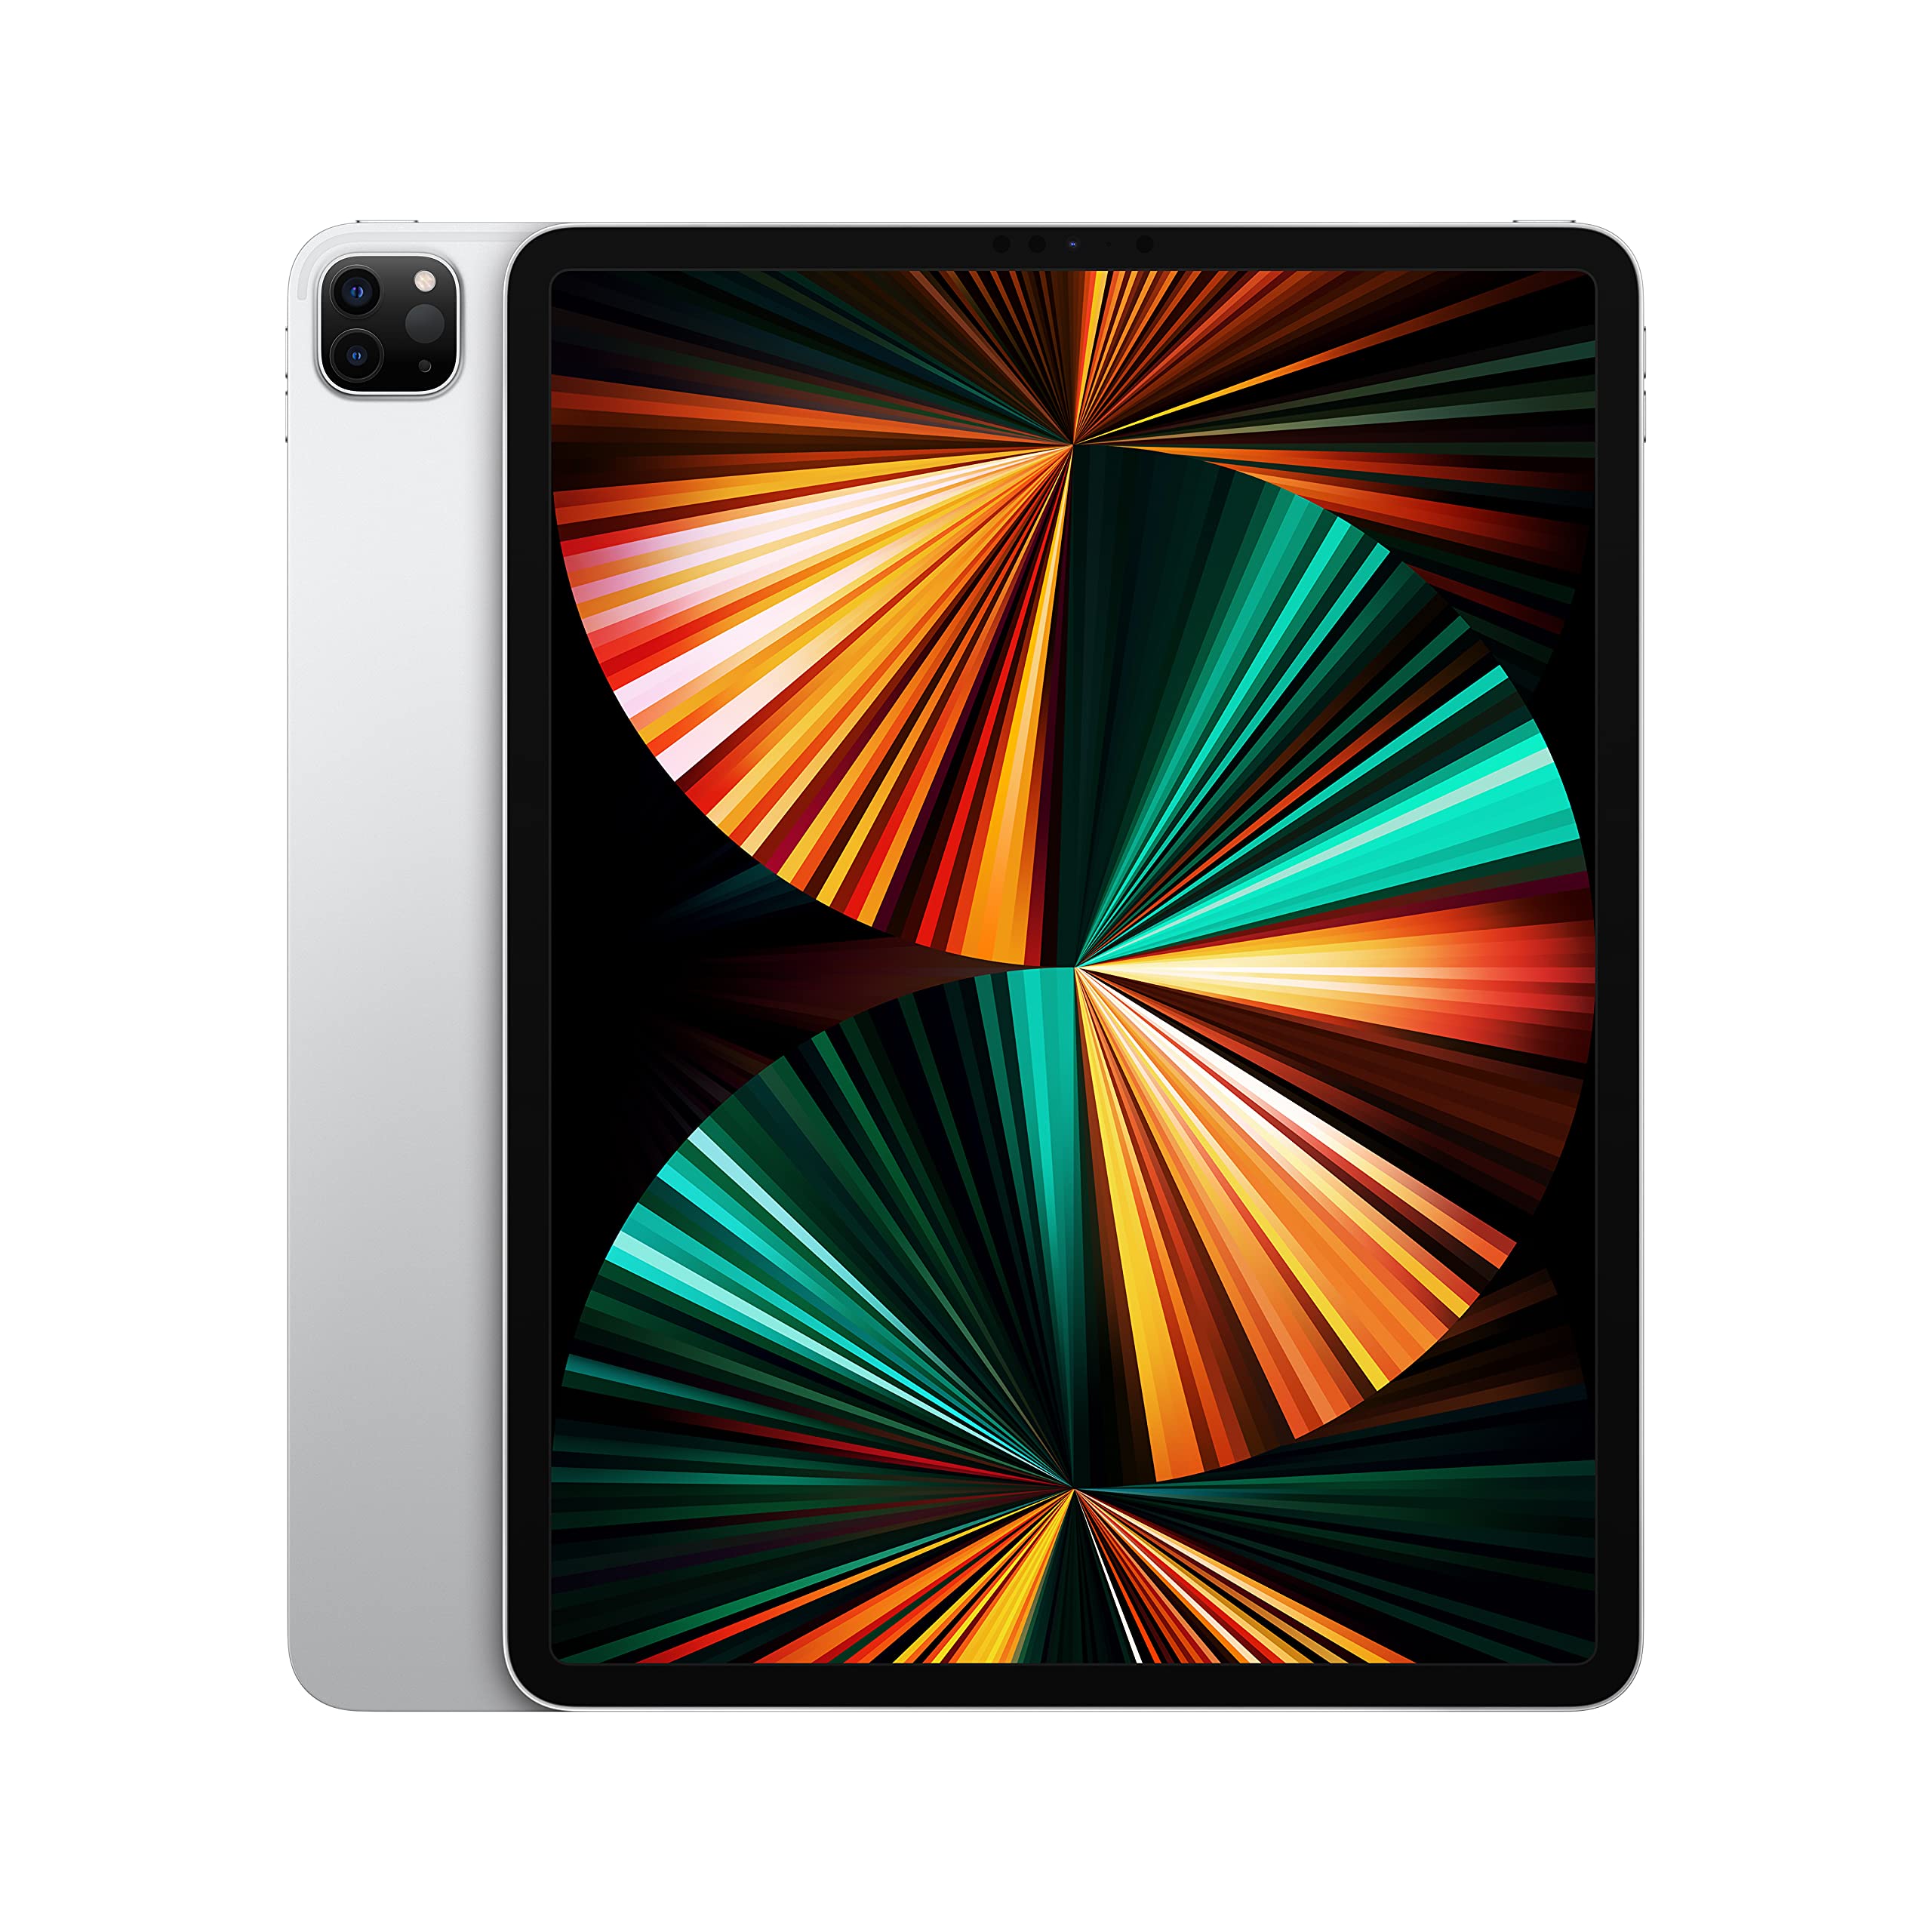 Best Buy- Apple Geek Squad Certified Refurbished 12.9-Inch iPad Pro  (5th Generation) with Wi-Fi 256GB Space Gray GSRF MHNH3LL/A - $699.99 and More at Best Buy